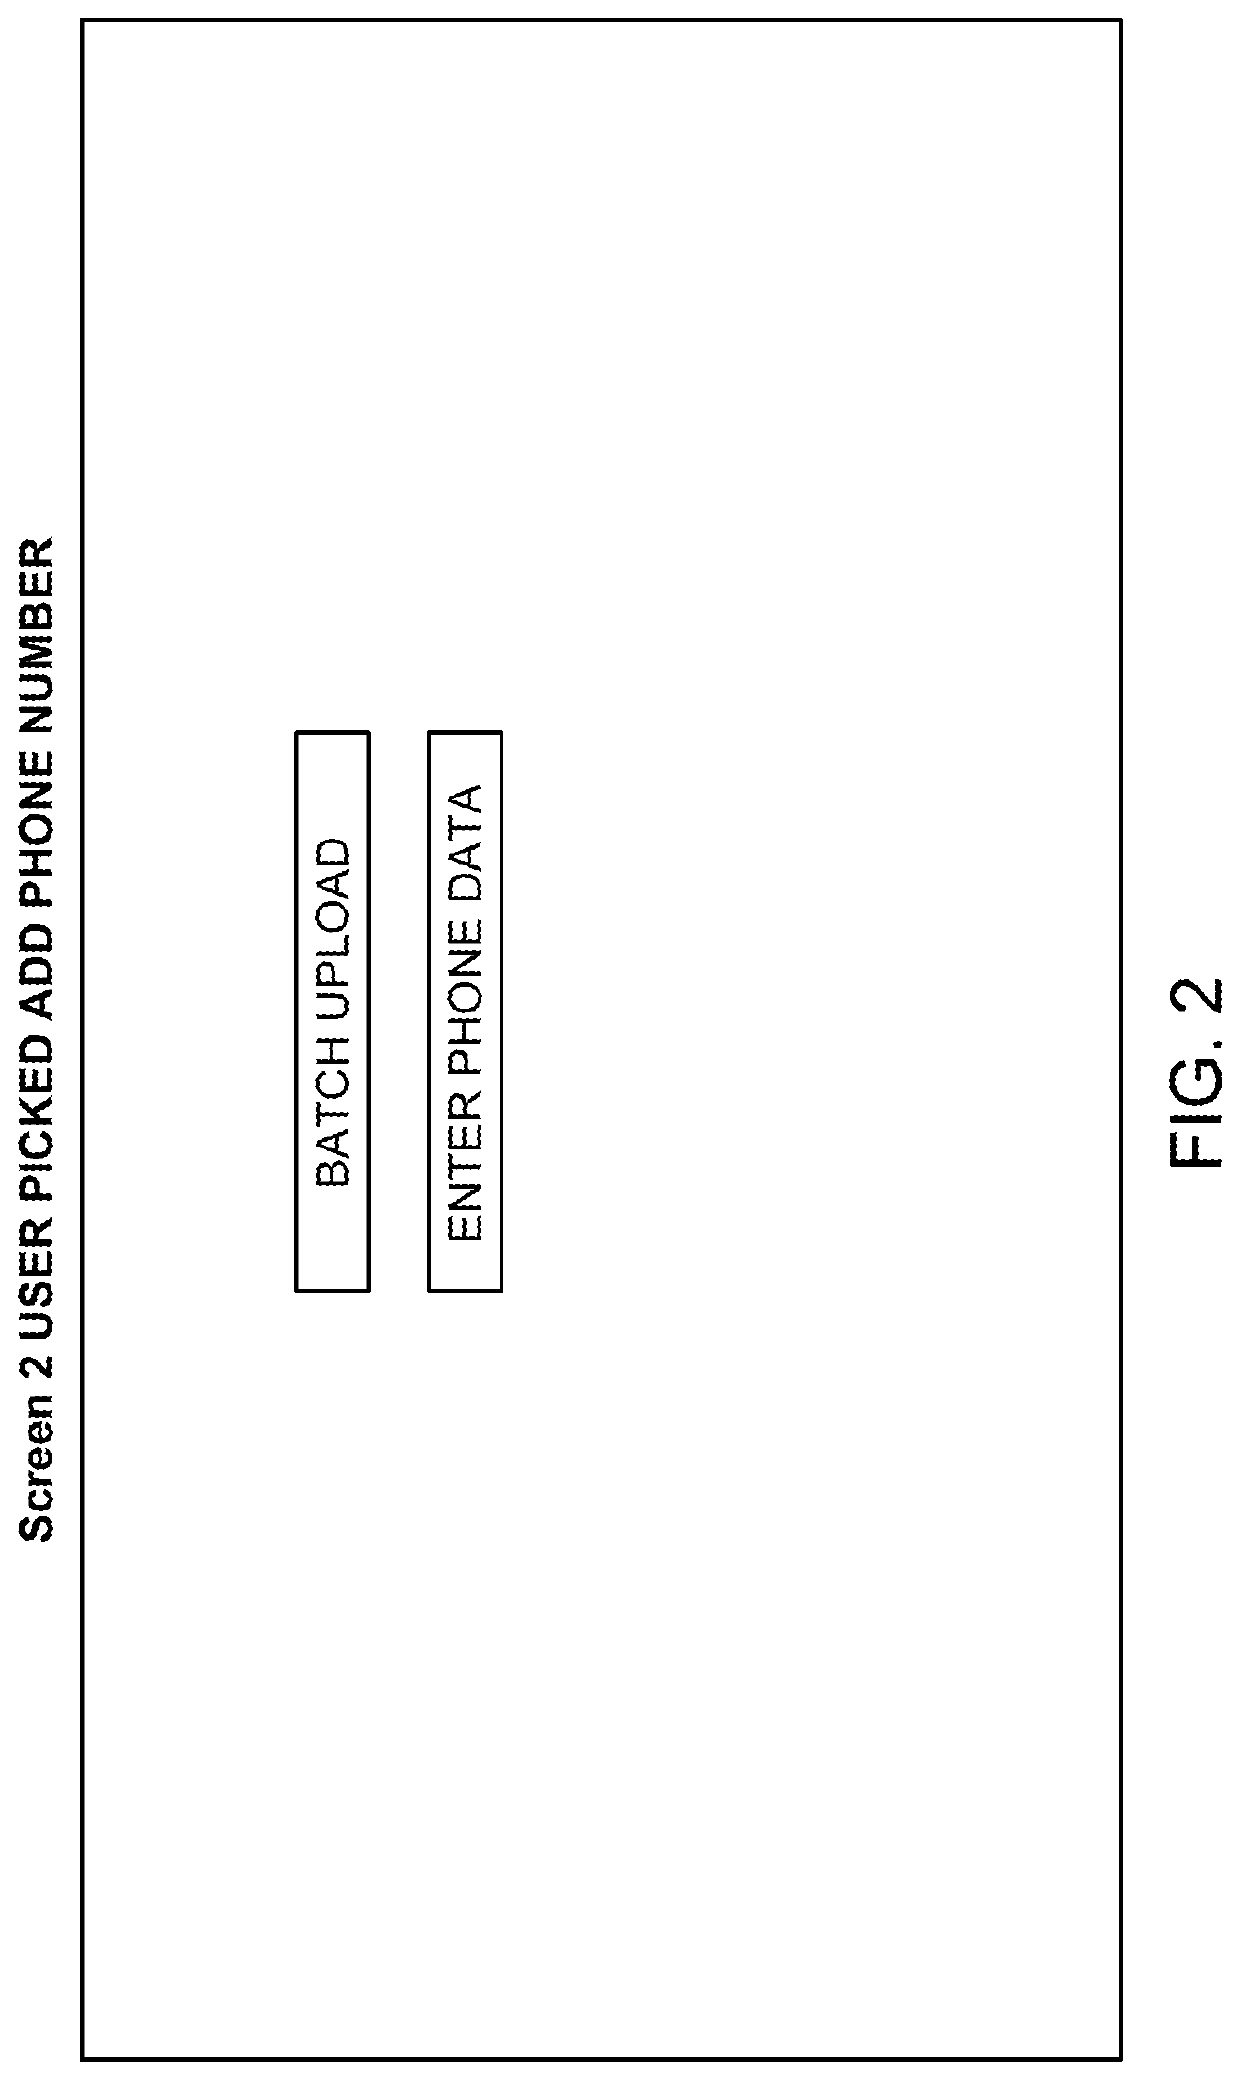 Systems and methods for information gathering, managing and disseminating for assessments and notifications in law enforcement and other environments